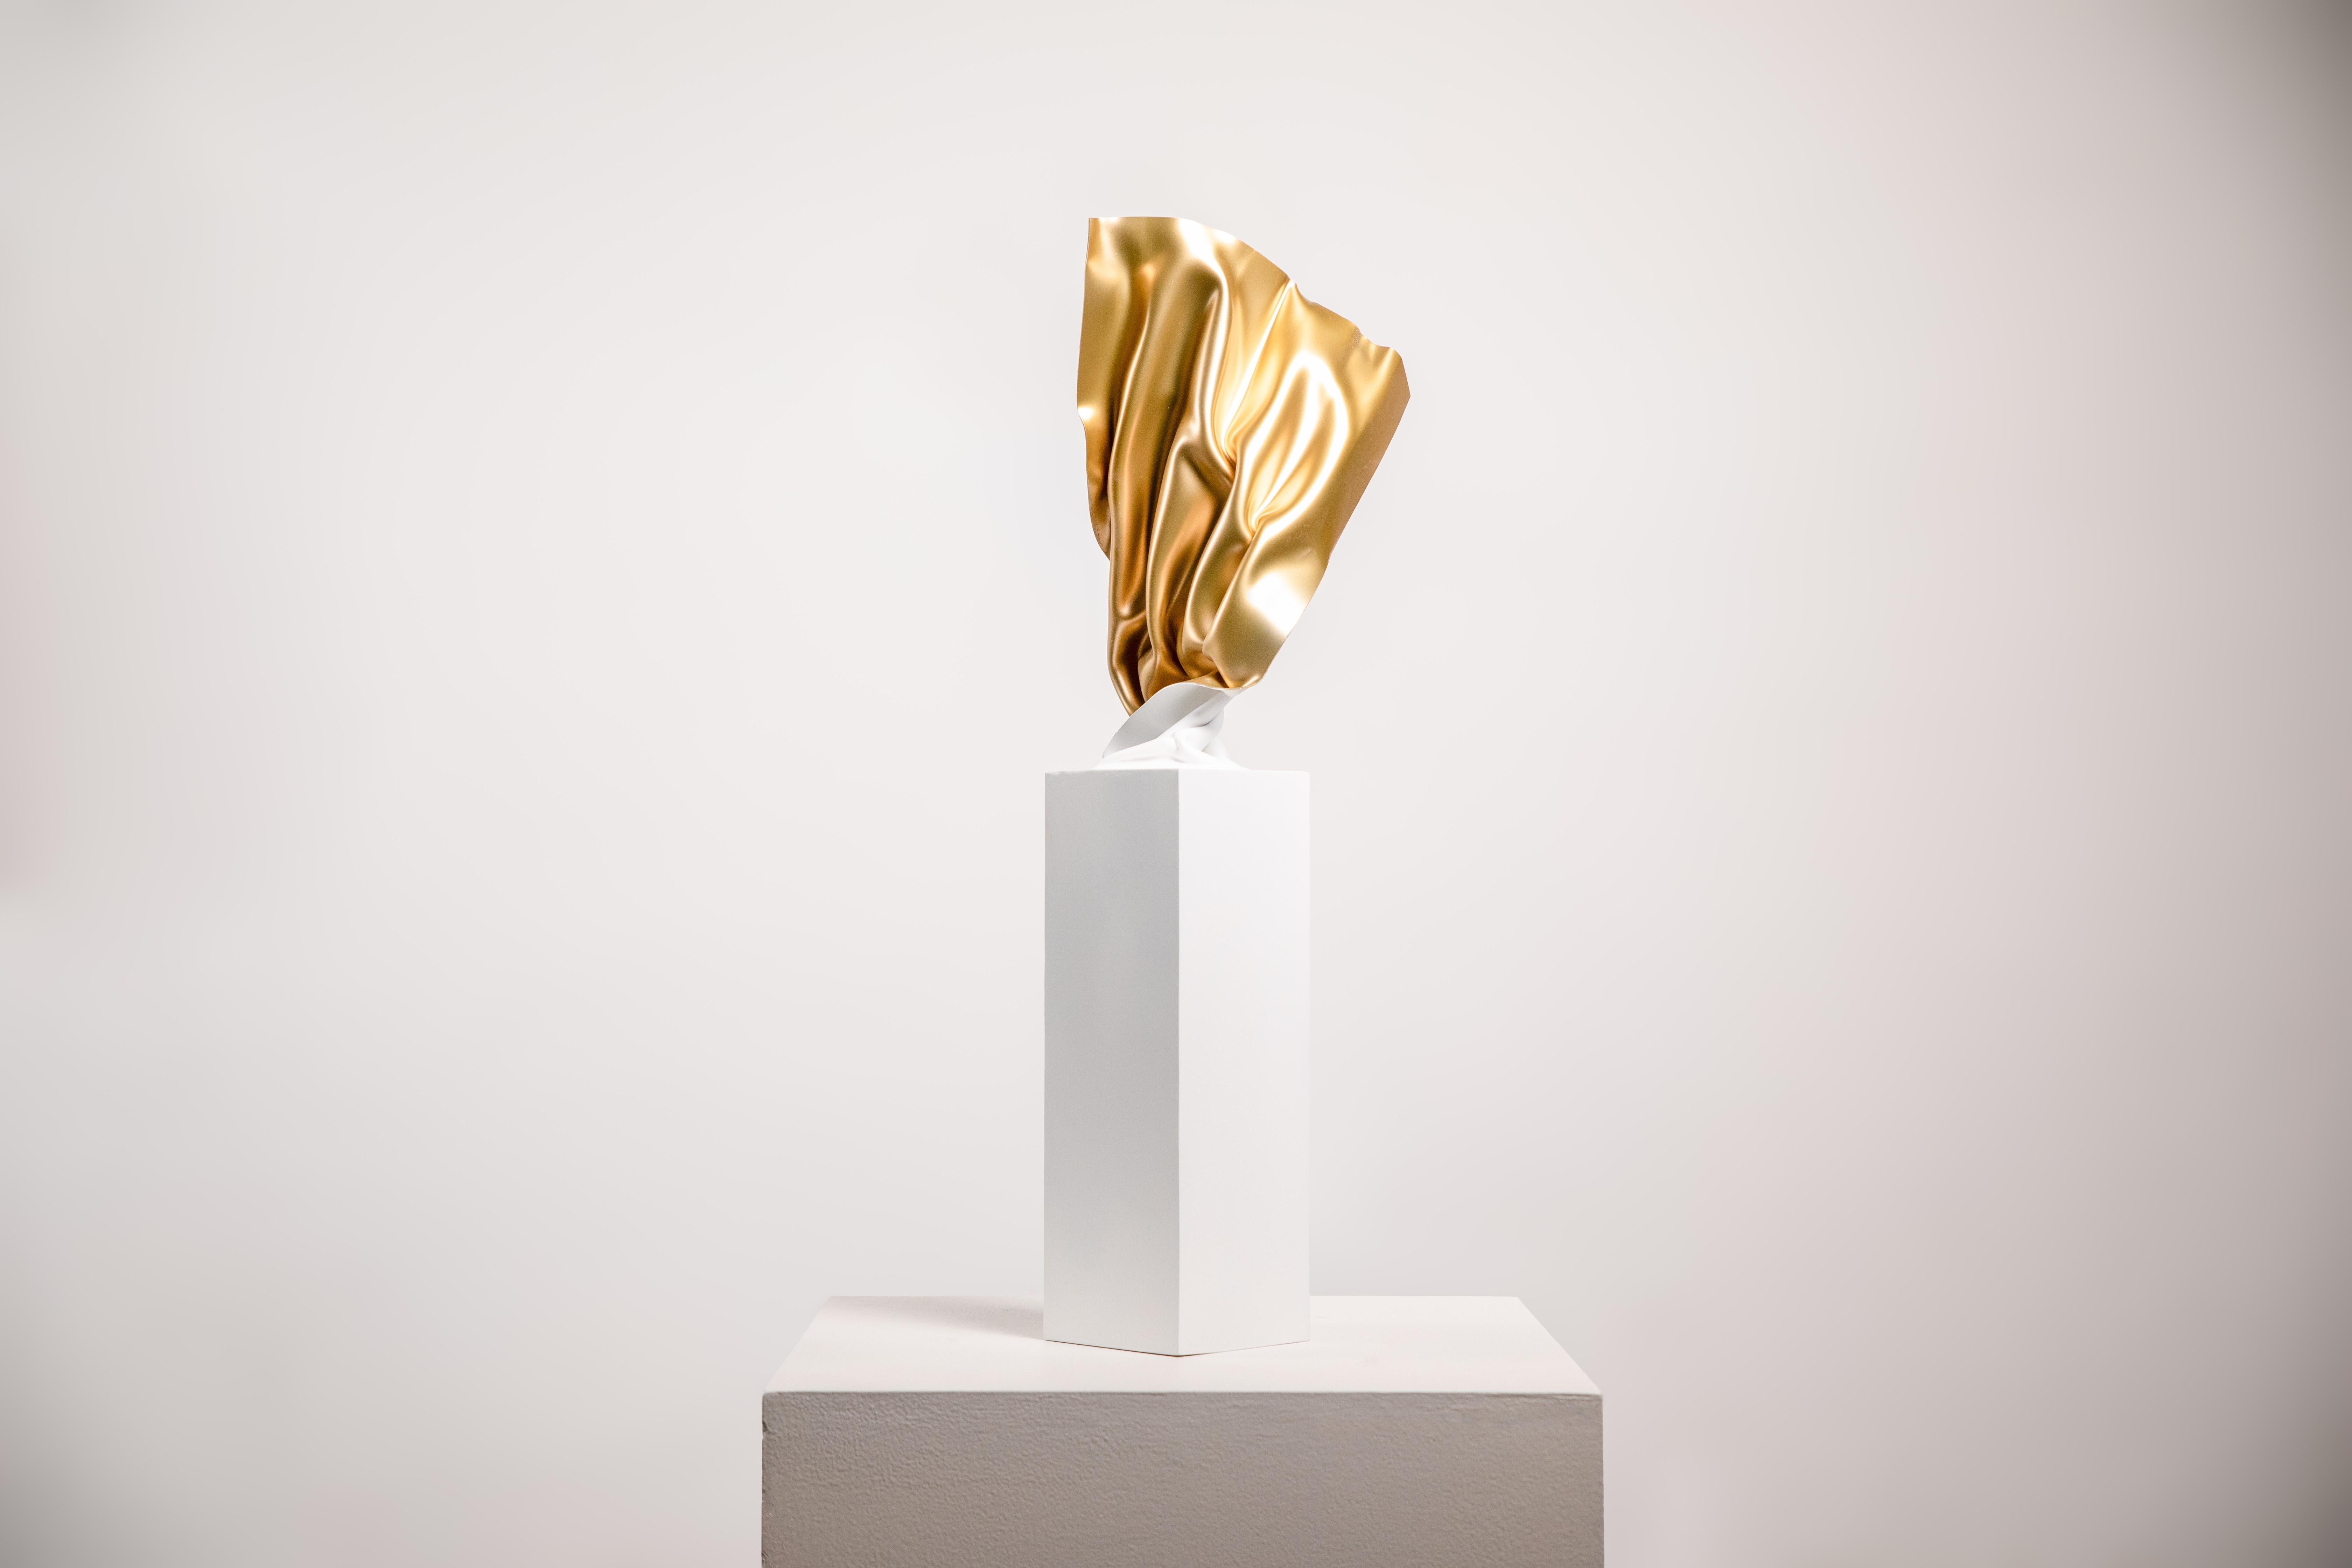 Lisbon-based, Miguel Rodrigues is renowed by having developed a highly innovative and personal artistic style: the hyperbaroque. His hyperbaroque sculptures summon the baroque’s conjunction of the transcendental and the ephemeral; playing elegantly